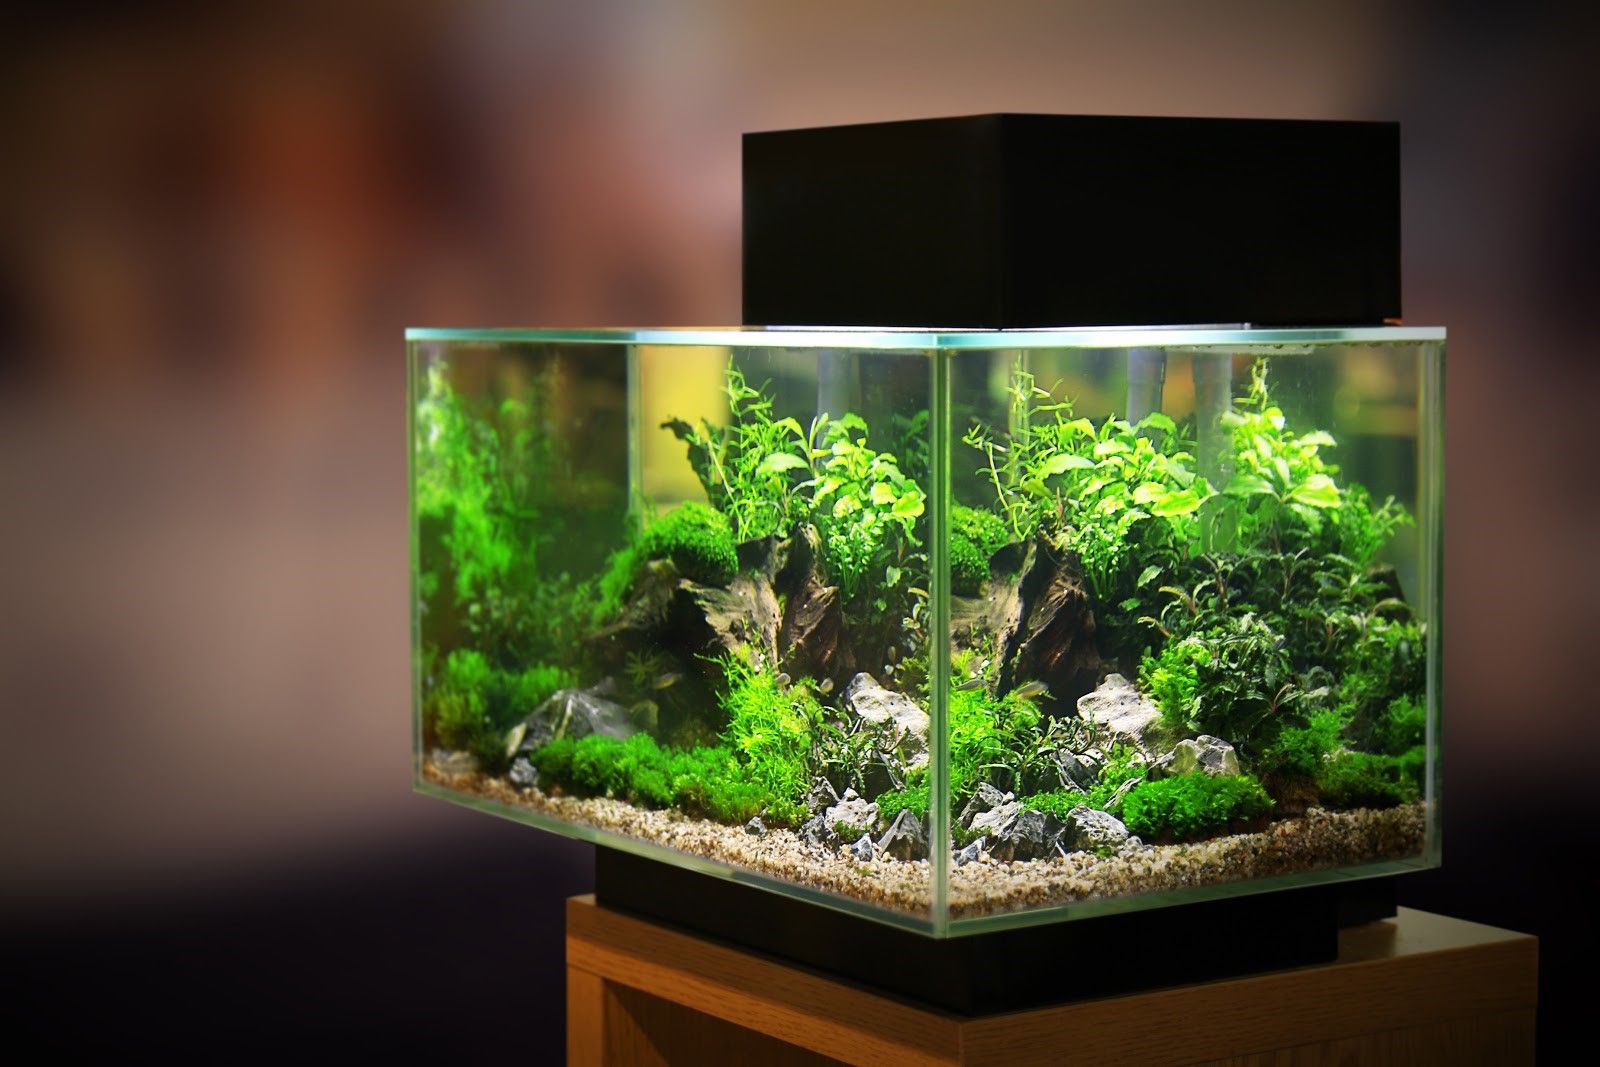 Fish tank with beautiful plants in it